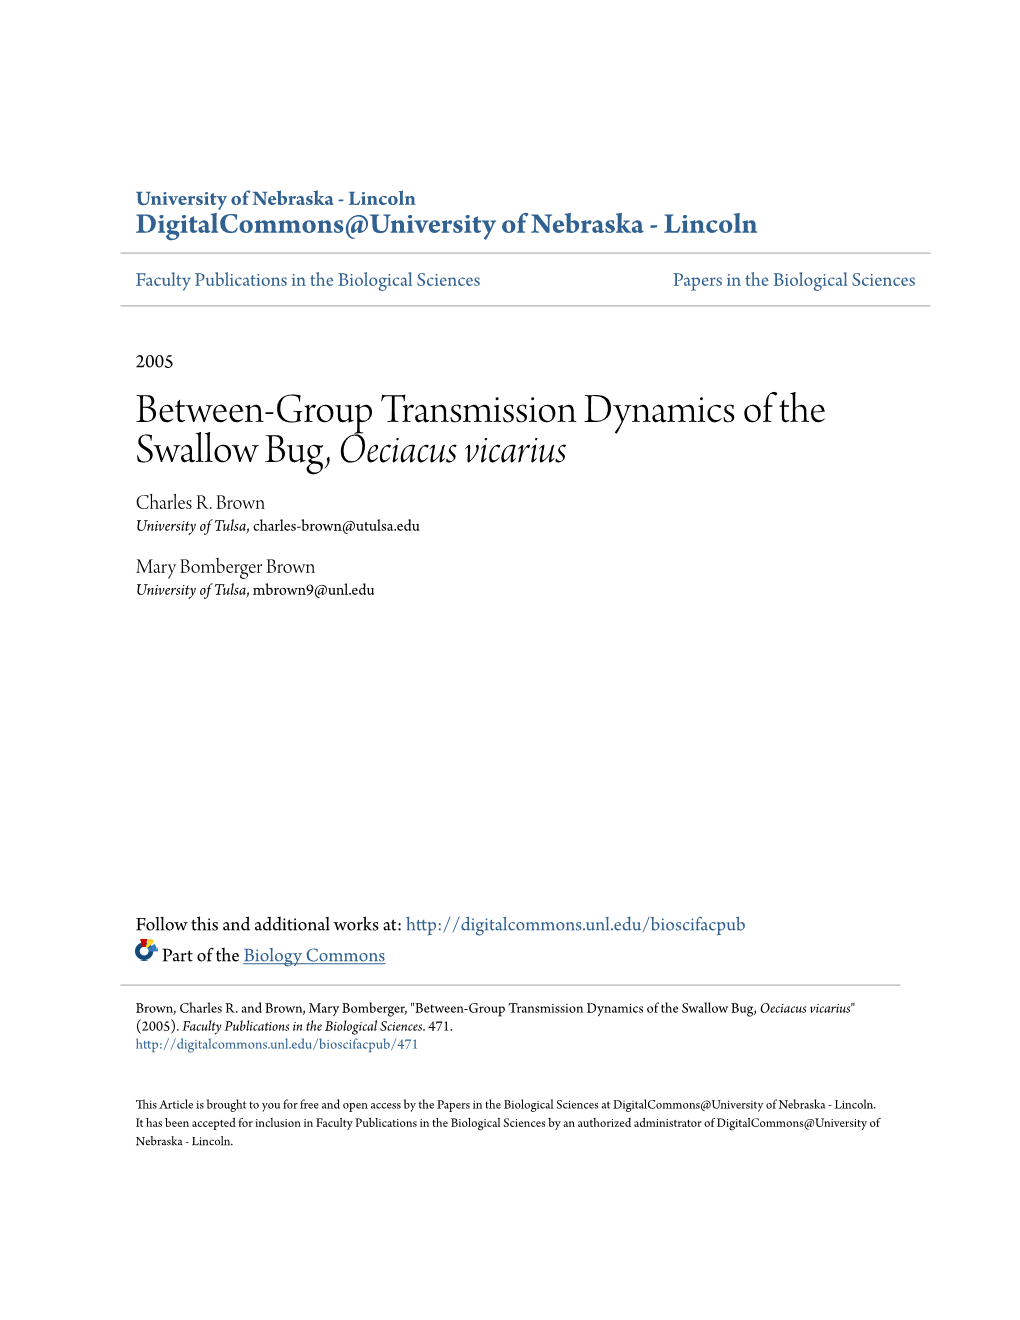 Between-Group Transmission Dynamics of the Swallow Bug, Oeciacus Vicarius Charles R